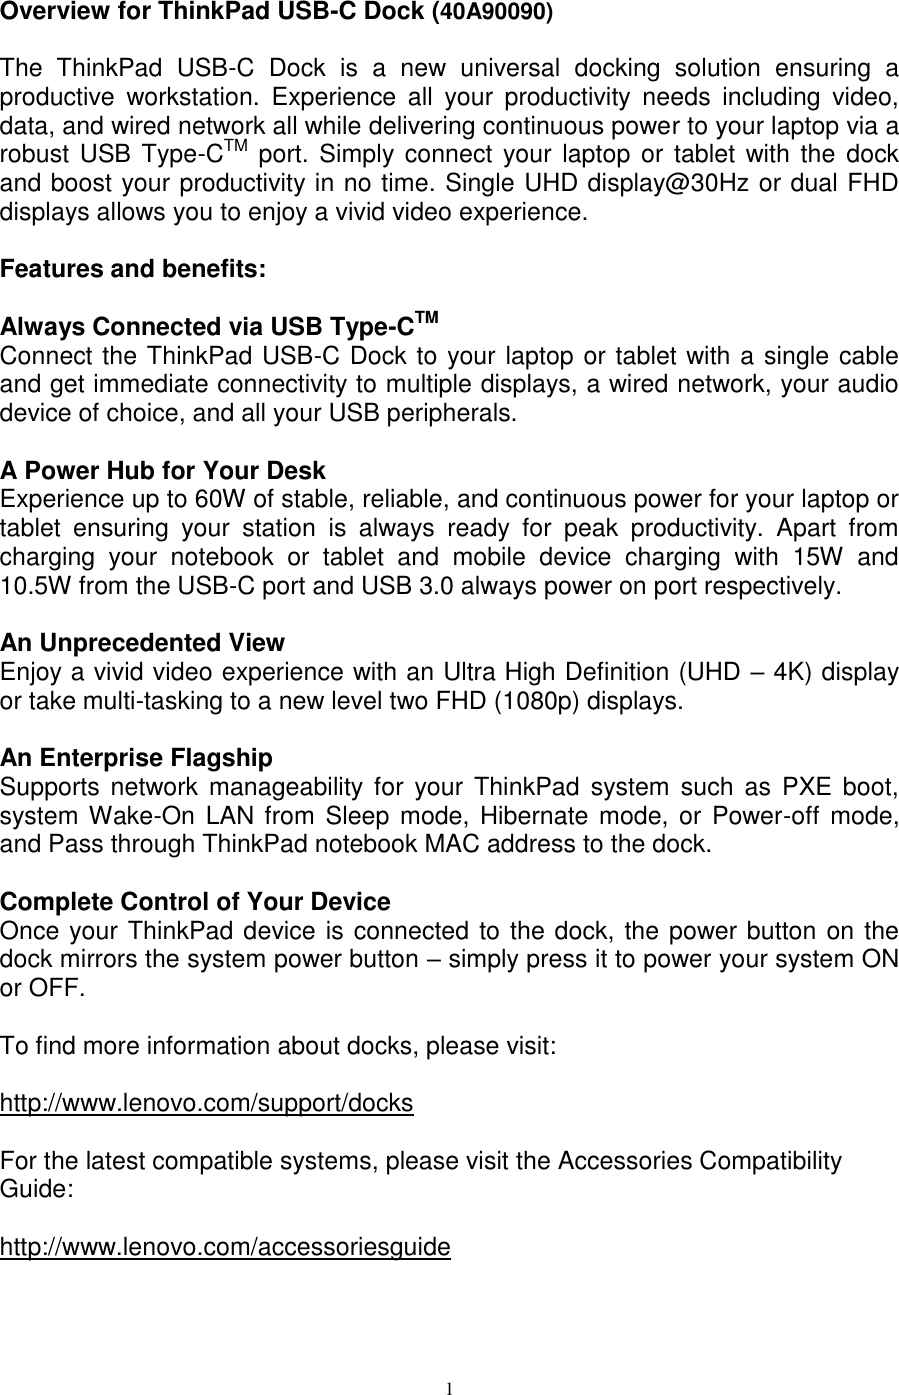 Page 1 of 5 - Lenovo Tp Usbc Dock 40A90090 OVERVIEW User Manual X1 Carbon 5th Gen - Kabylake (Type 20HR, 20HQ) Laptop (Think Pad)